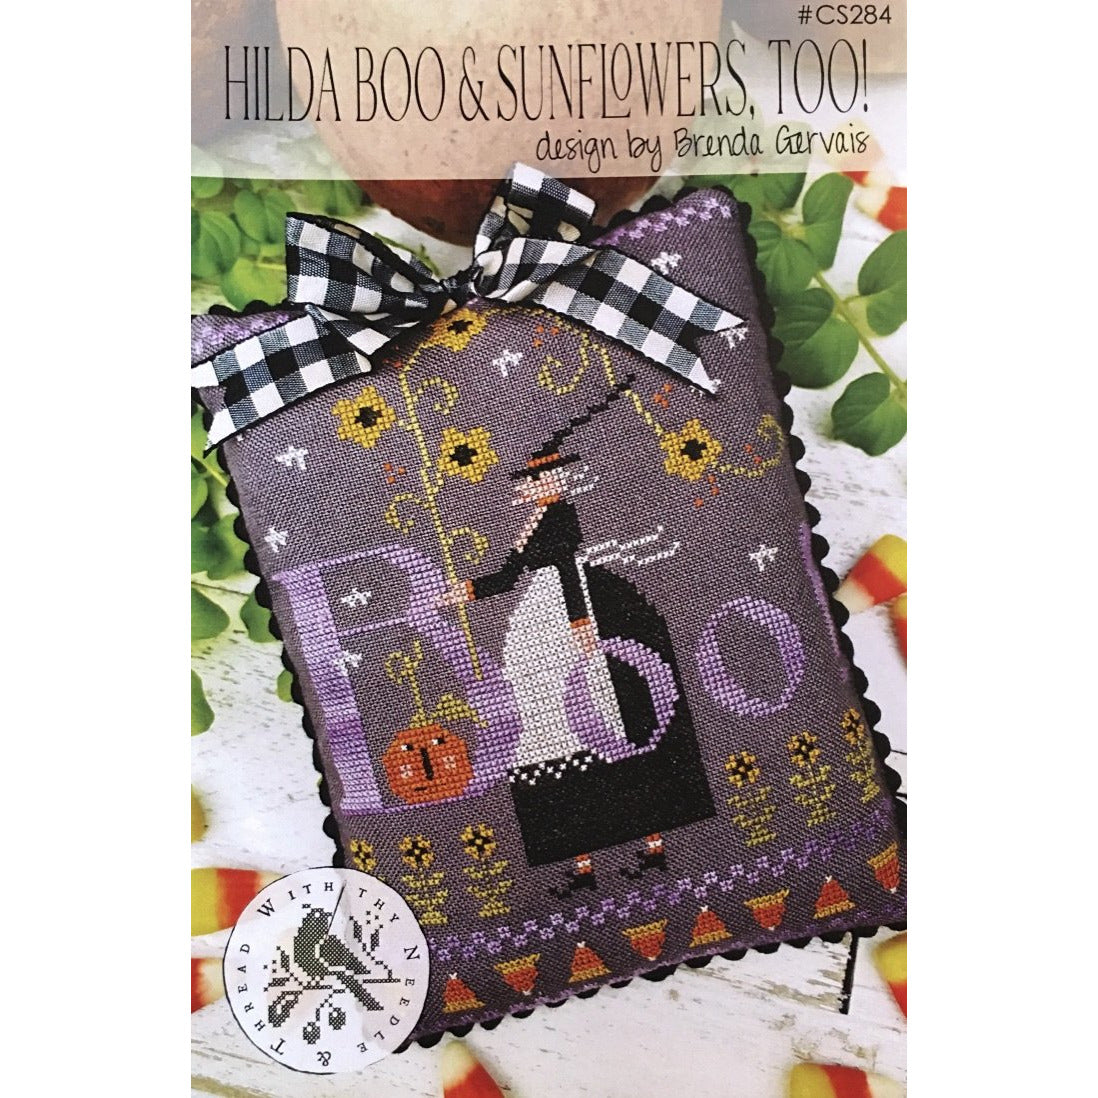 With Thy Needle & Thread ~ Hilda Boo & Sunflowers, Too! Pattern